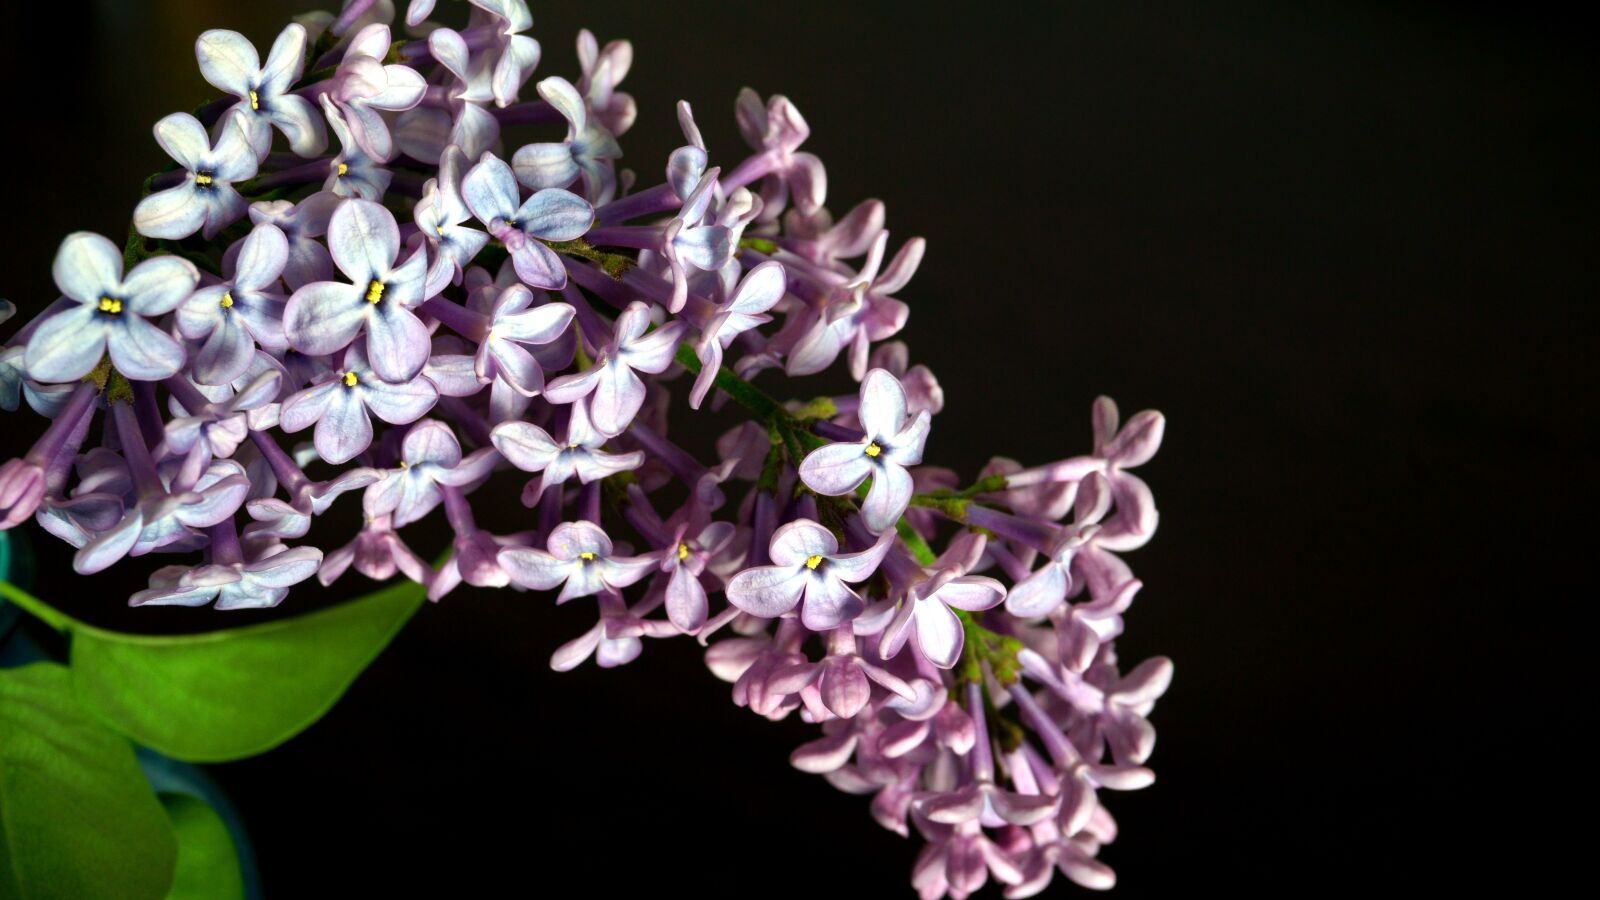 Sony a5100 sample photo. Lilac, flower, nature photography